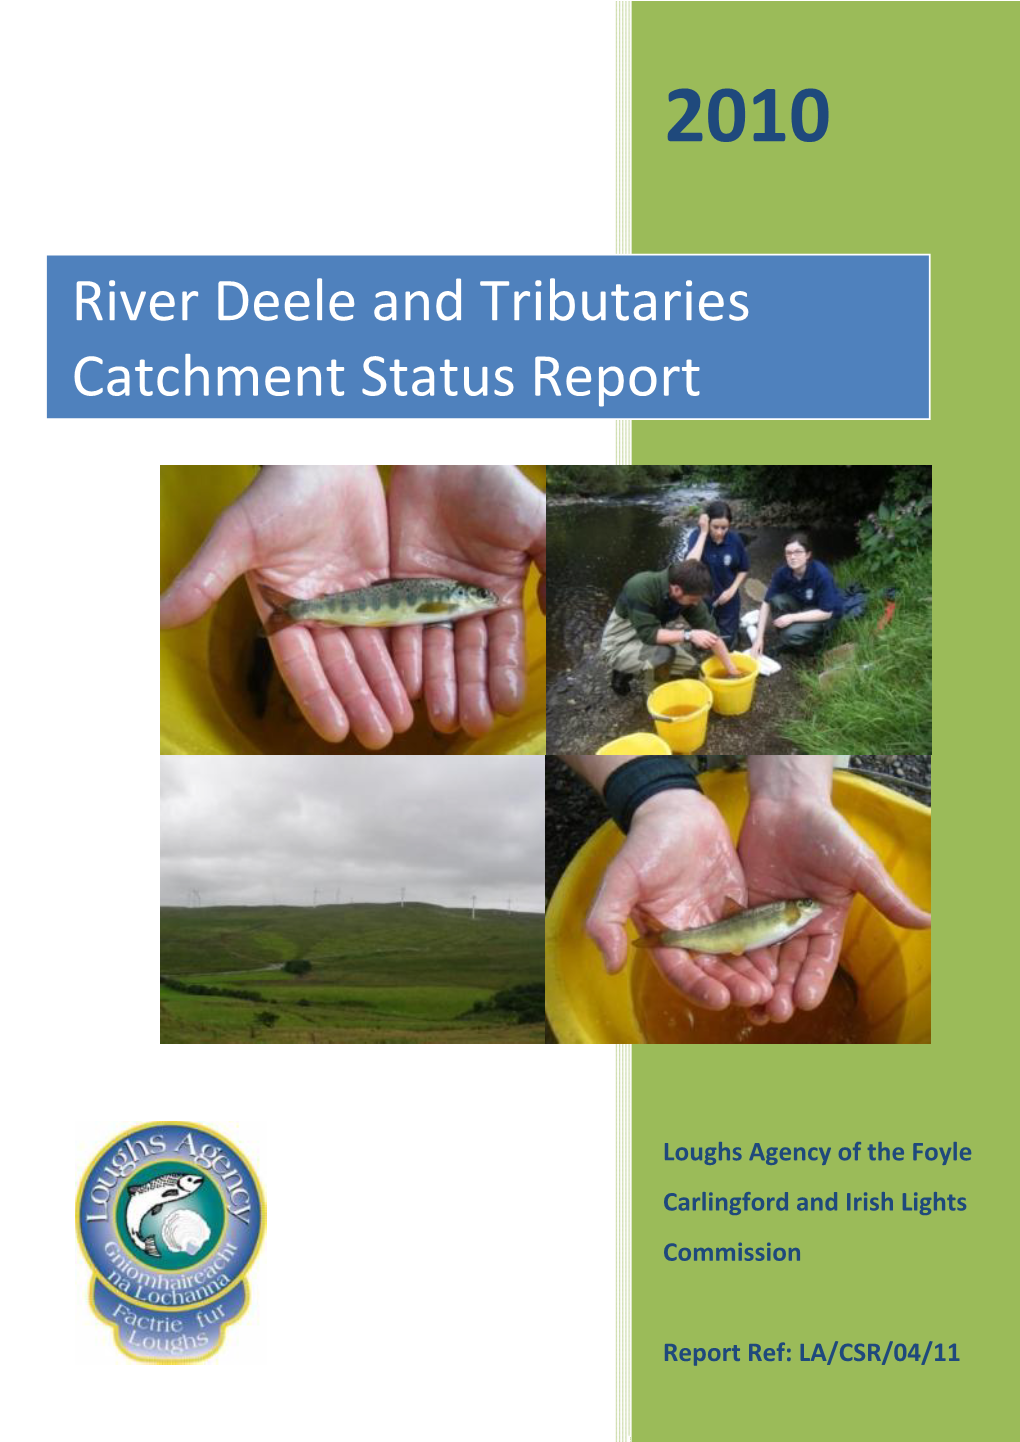 River Deele and Tributaries Catchment Status Report